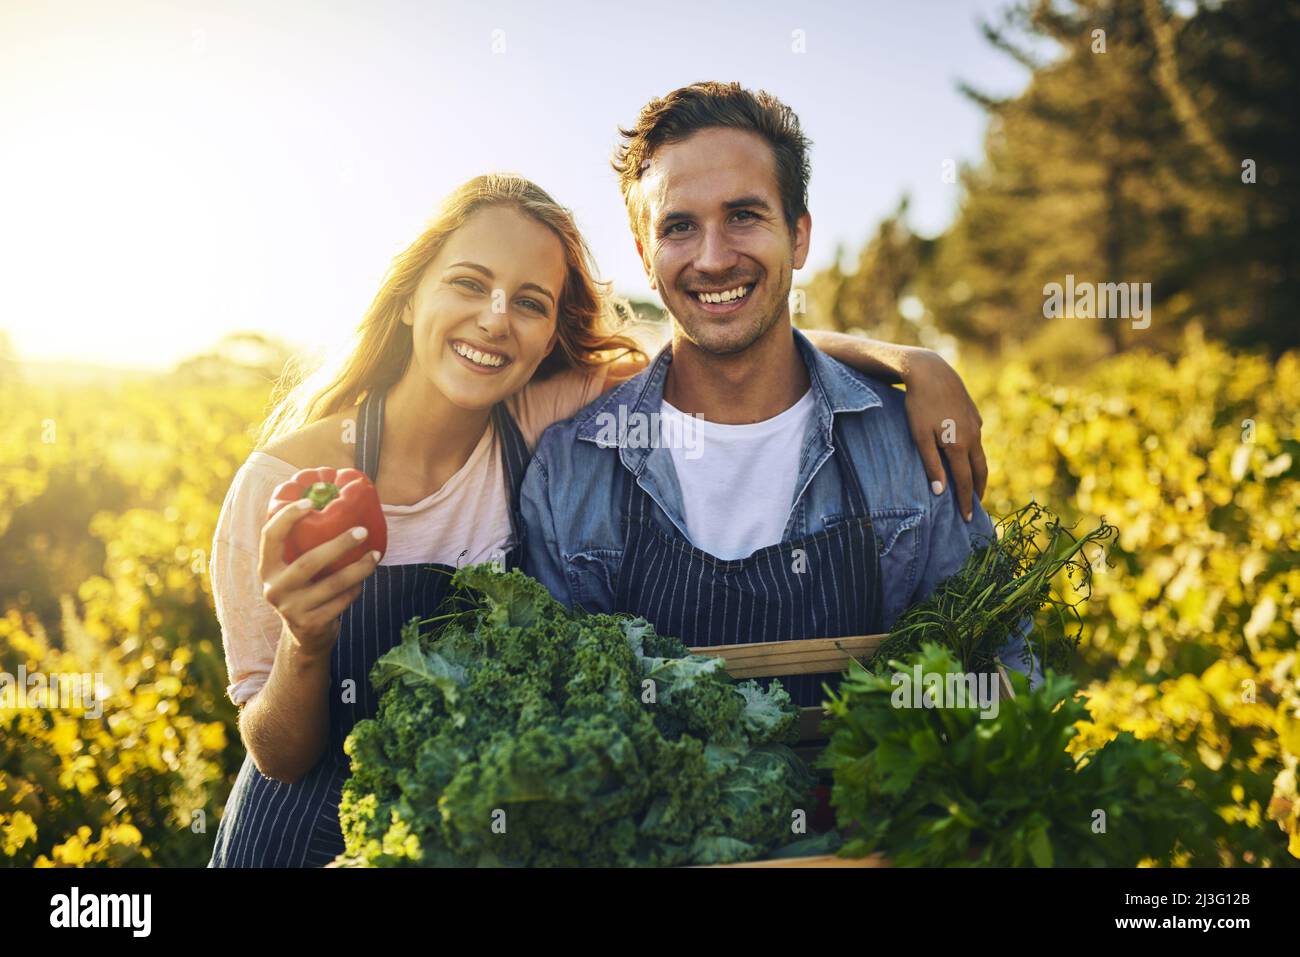 They look good and taste even better. Shot of a young man and woman working together on a farm. Stock Photo